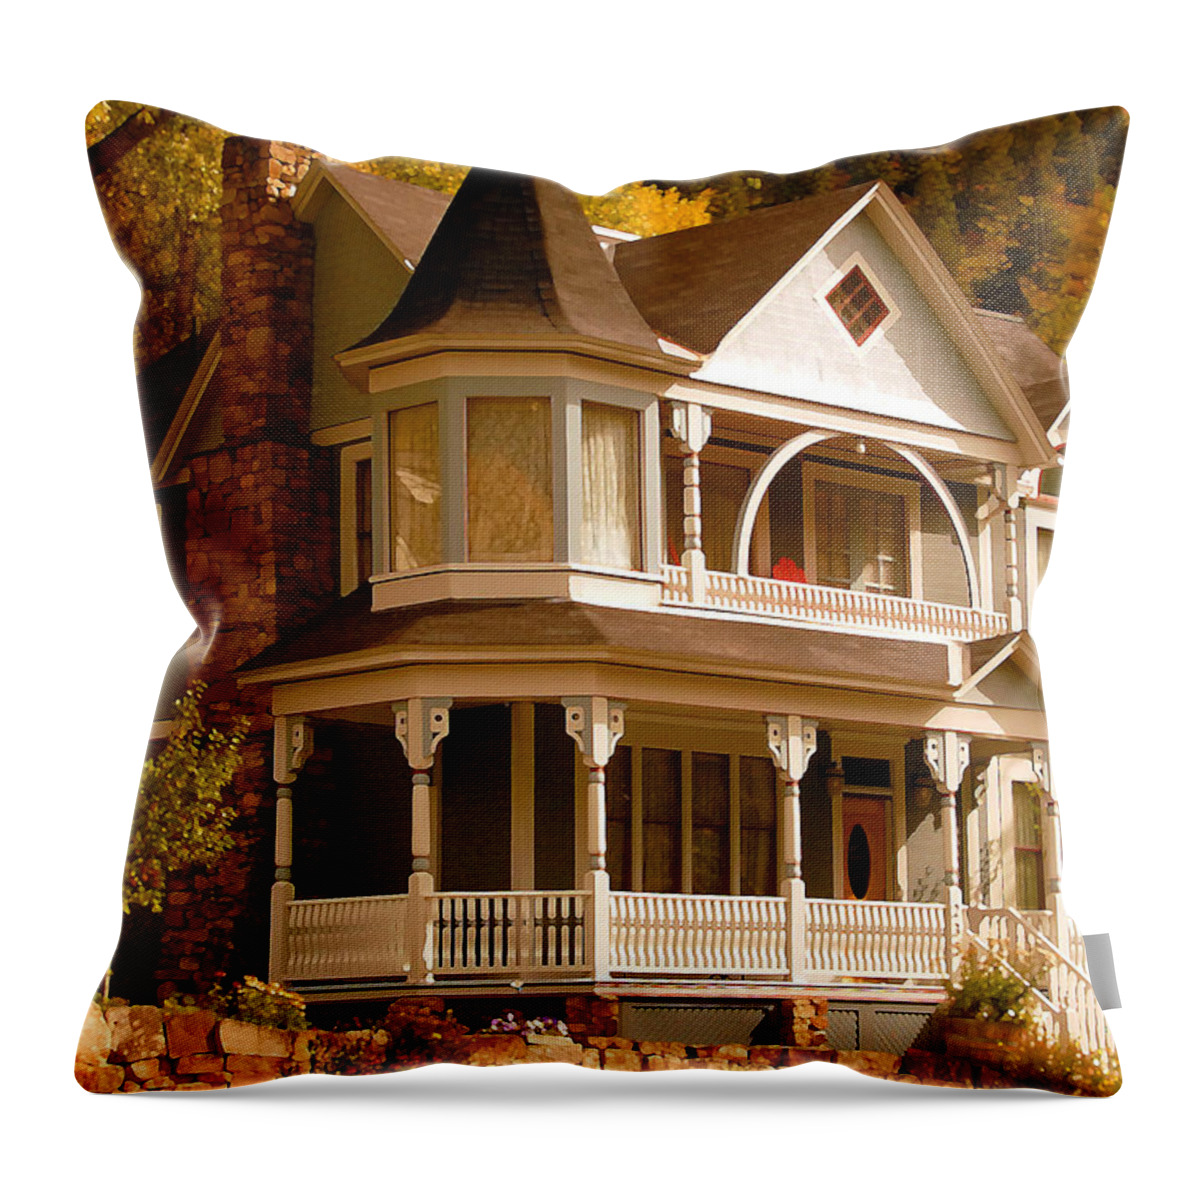 Autumn Throw Pillow featuring the painting Autumn House by David Lee Thompson